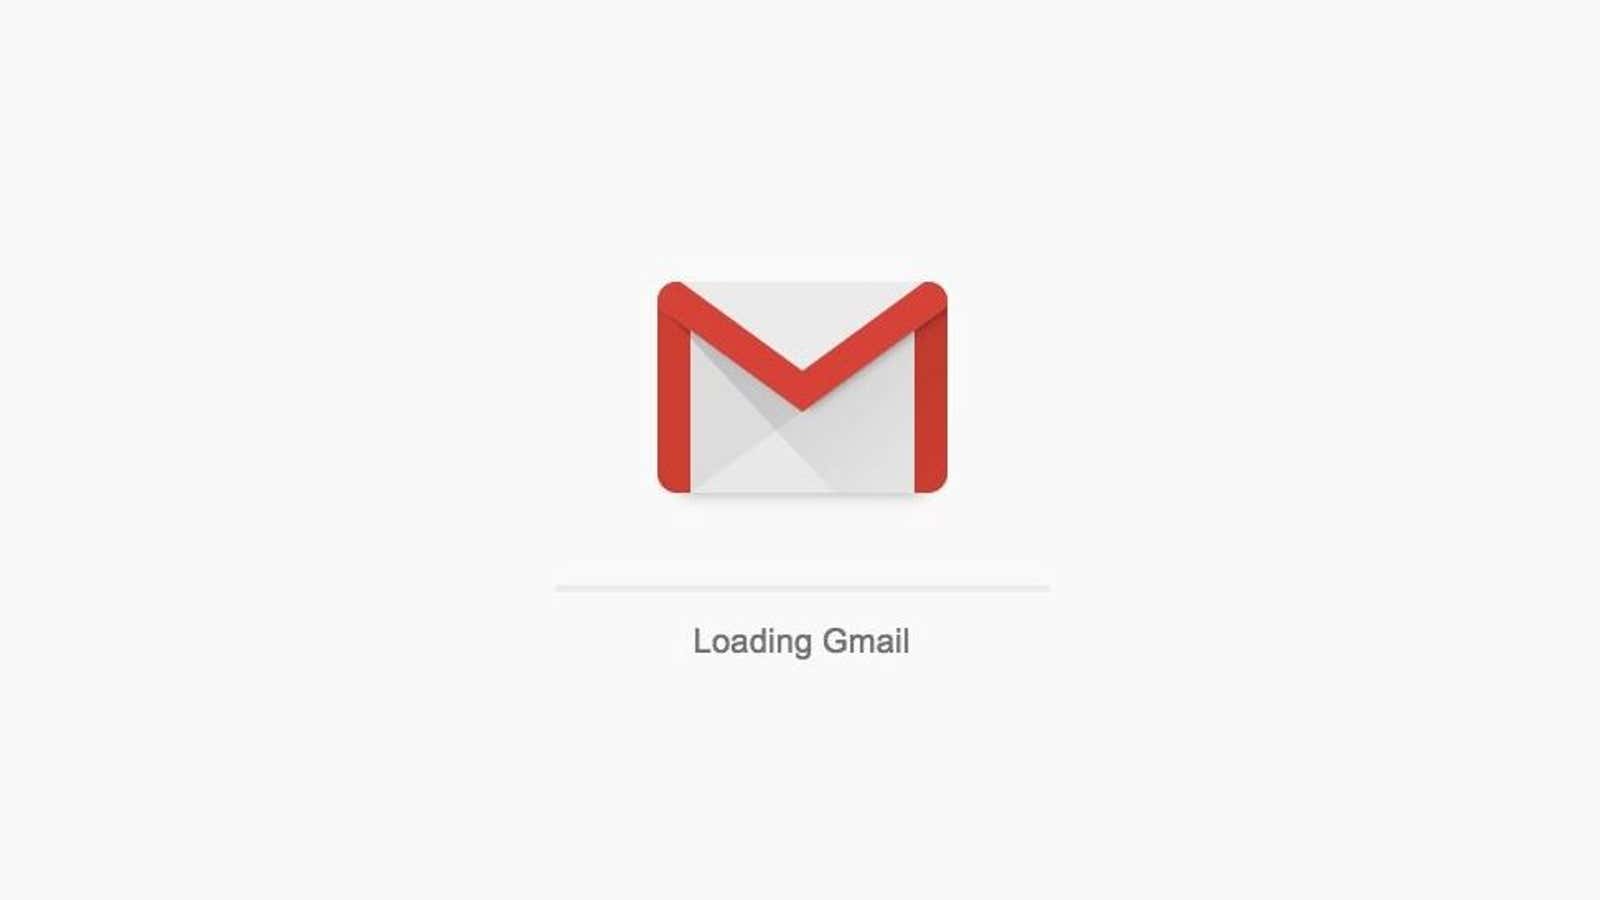 You have to try the new Gmail